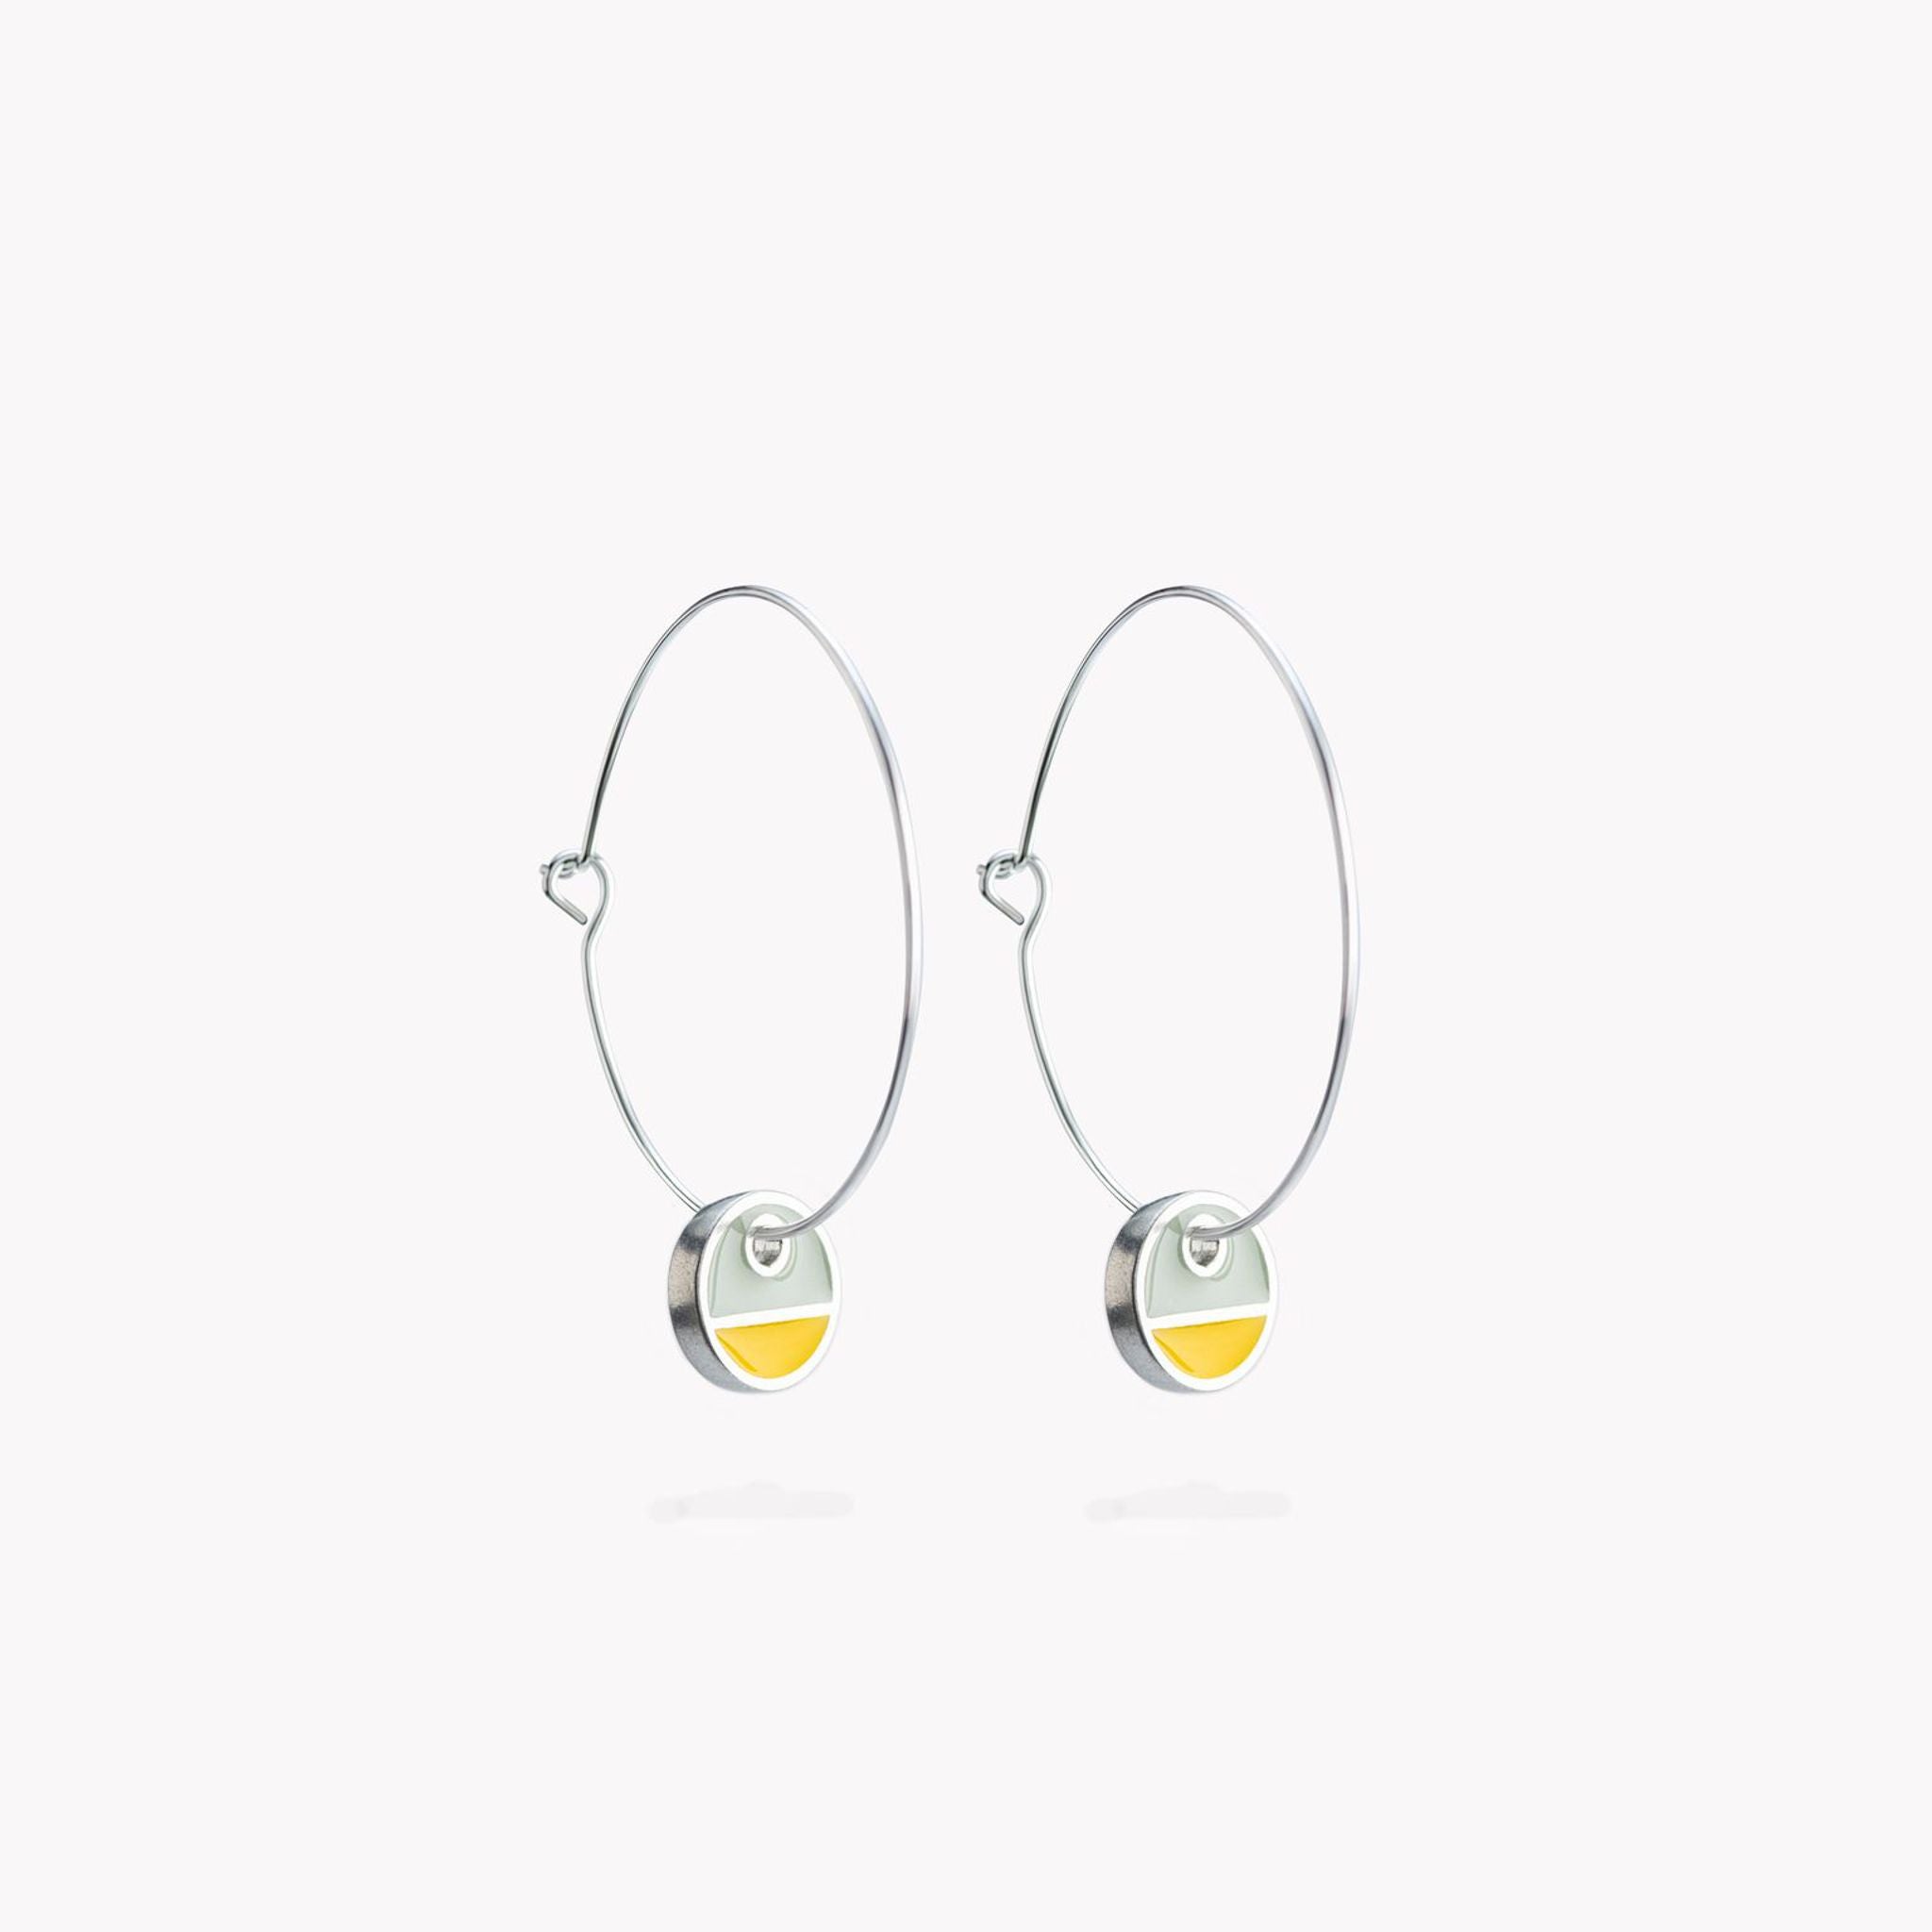 A simple pair of hoop earrings with yellow and grey circular hanging discs.